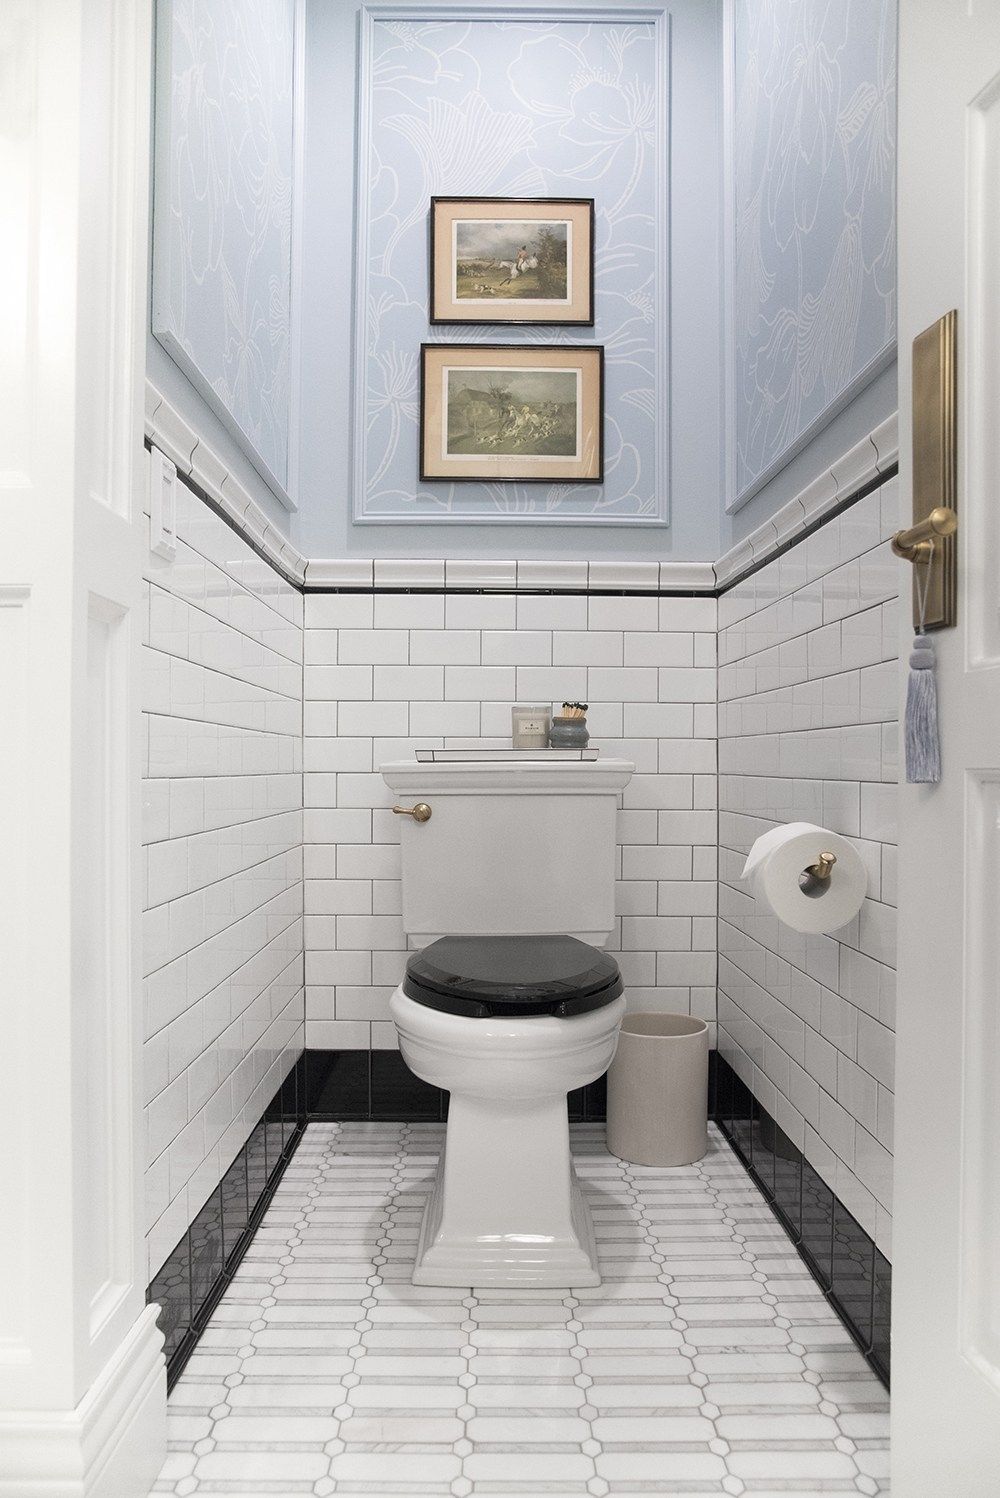 Redesign the bathroom: upgrade to a
comfort toilet